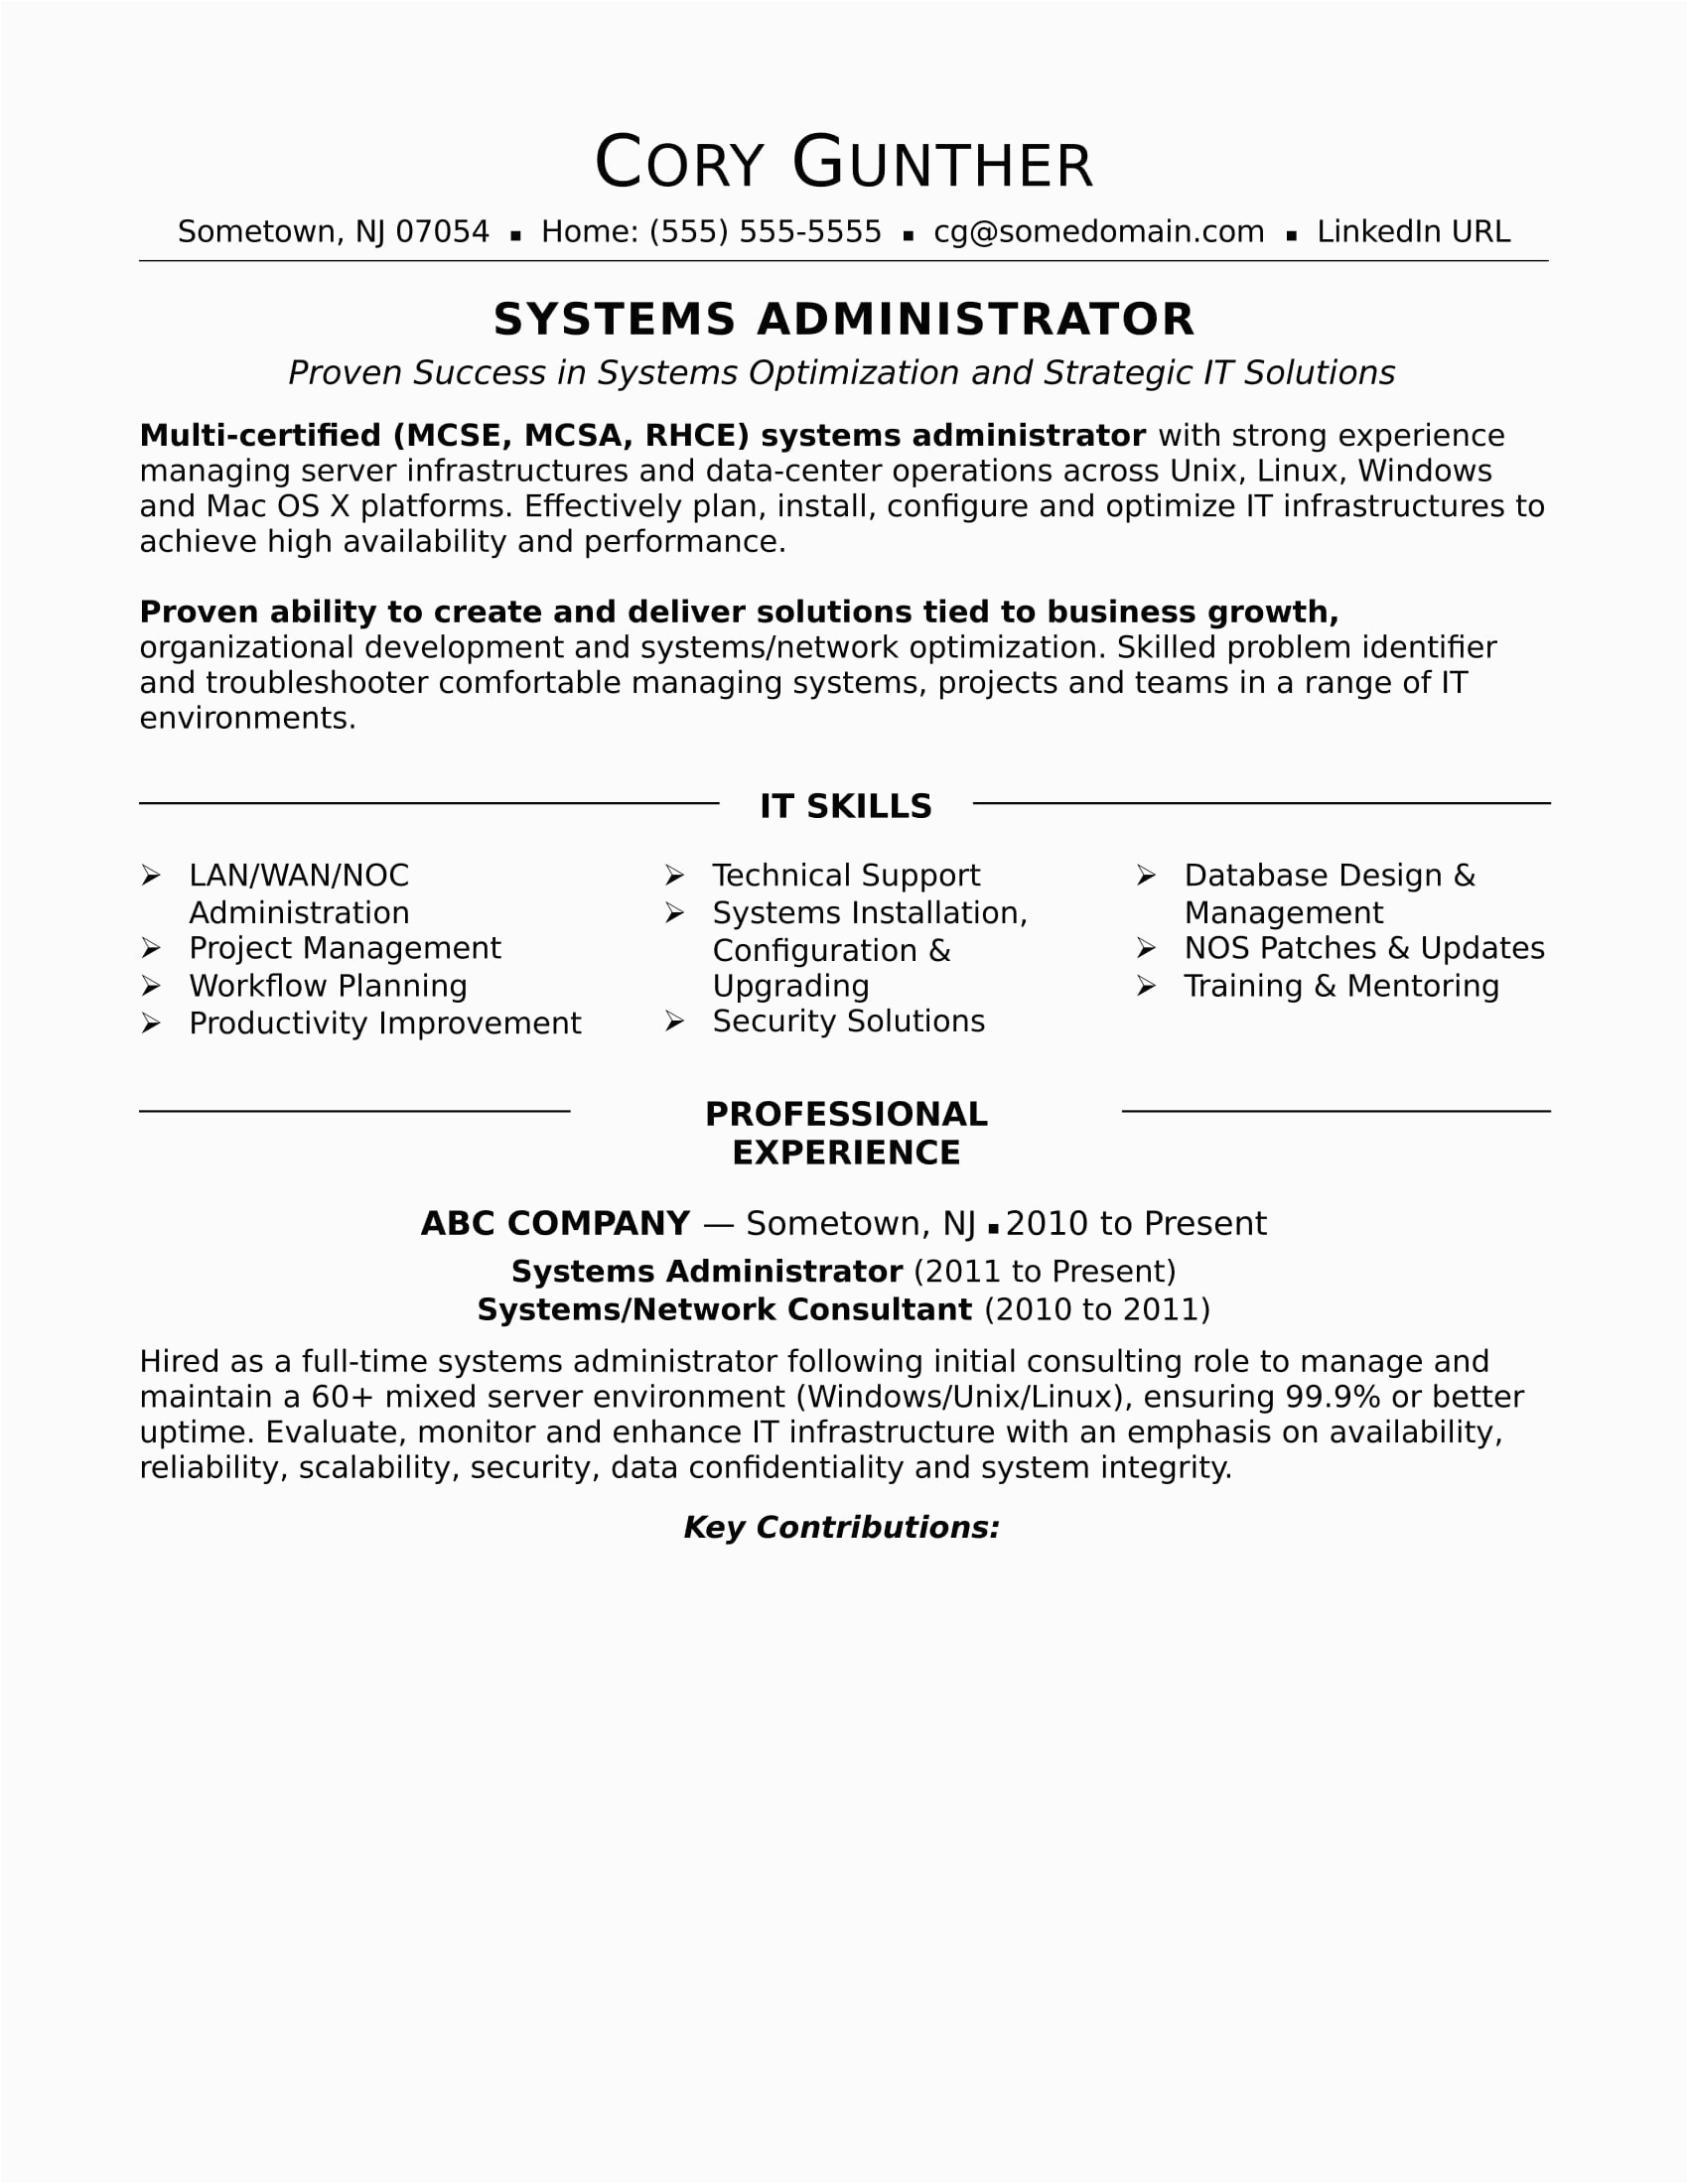 Systems and Network Administrator Resume Sample Professional Cv Network Administrator Network Administrator Resume